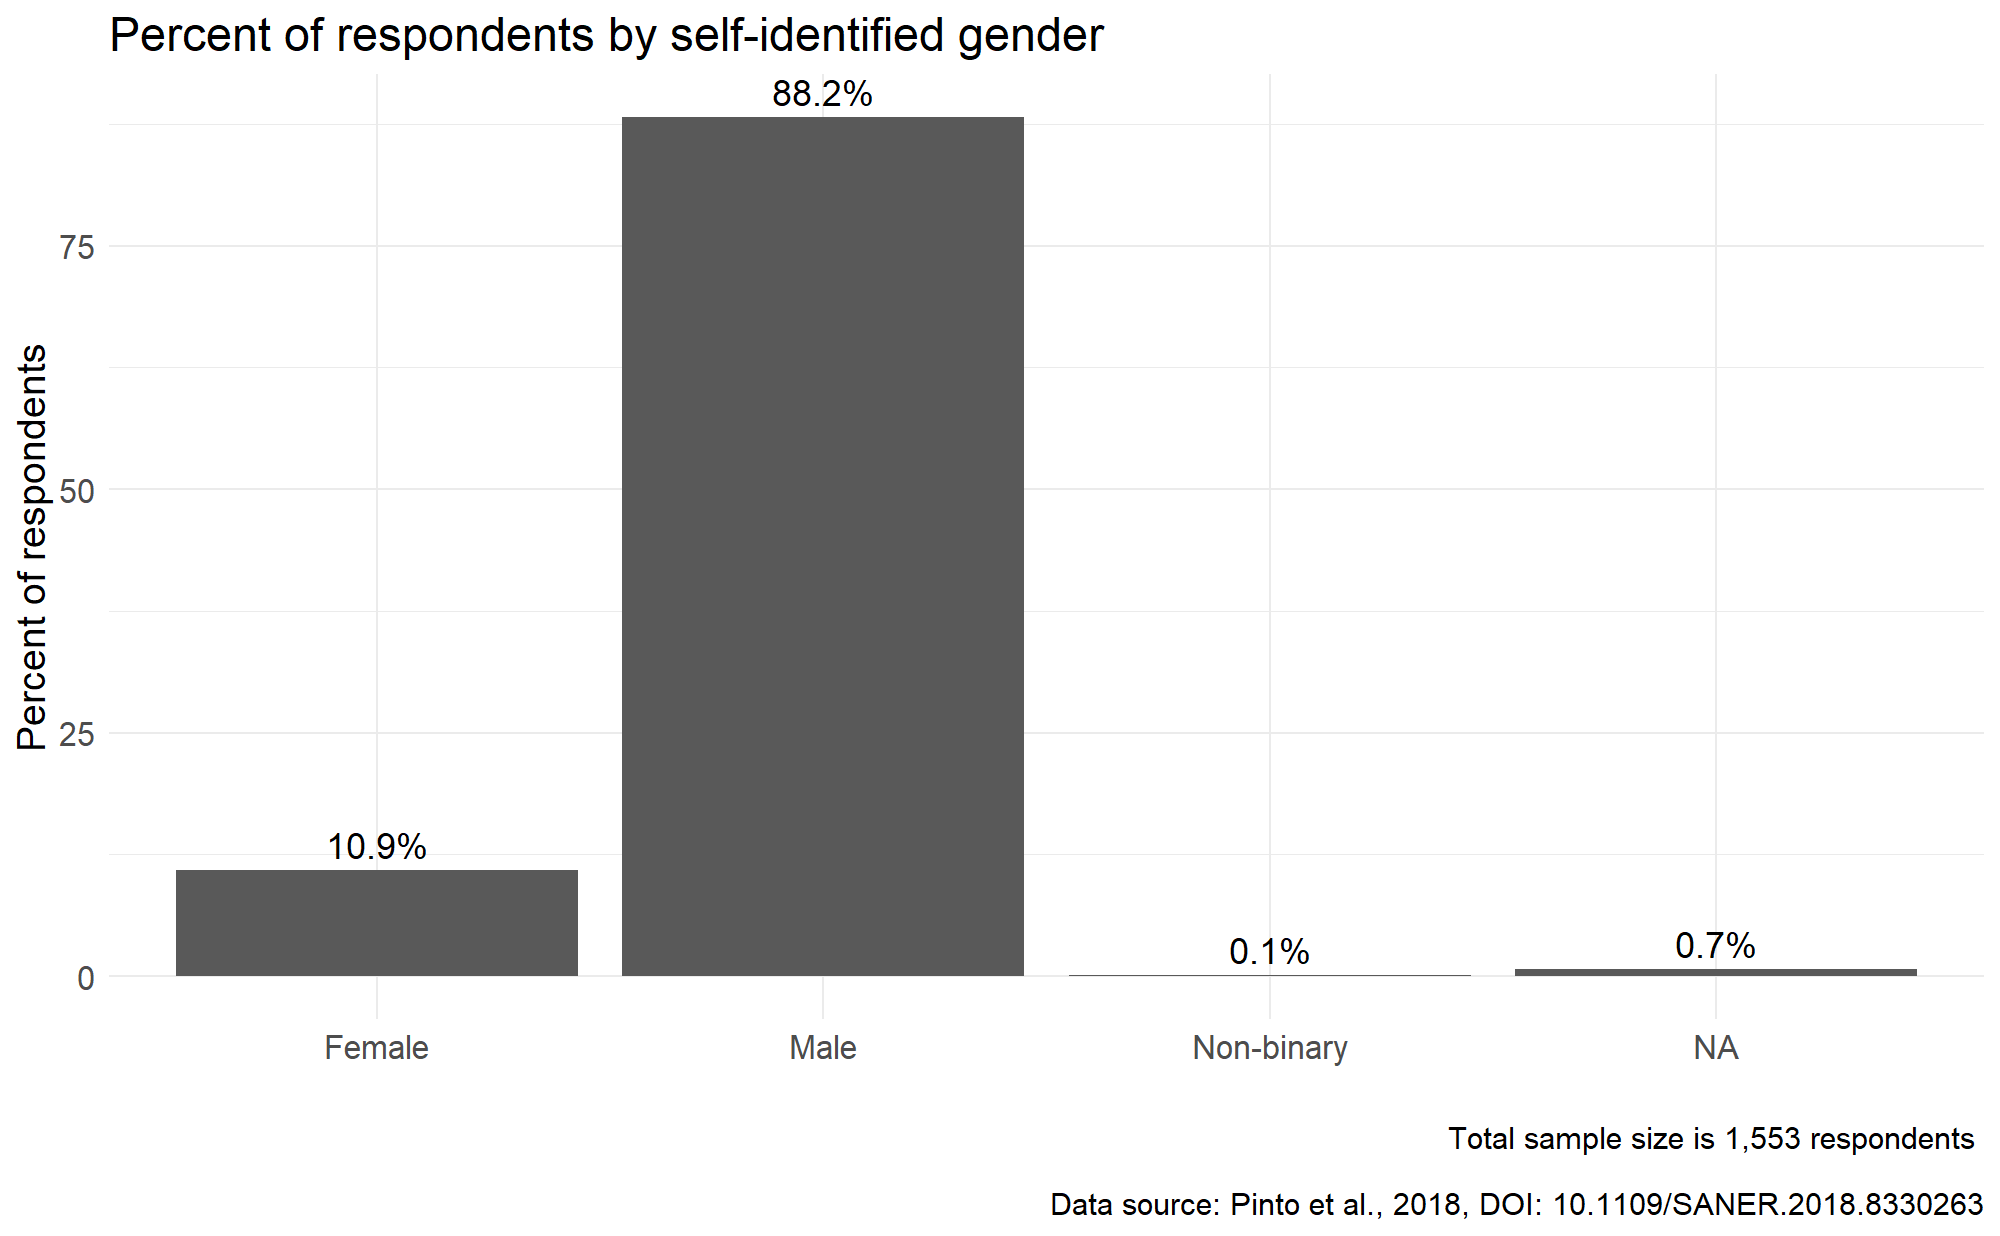 In 2017, of the package authors surveyed, 10.9% of respondents self-identified as female, about 88.2% self-identified as male, 0.1% of respondents self-identified as non-binary.